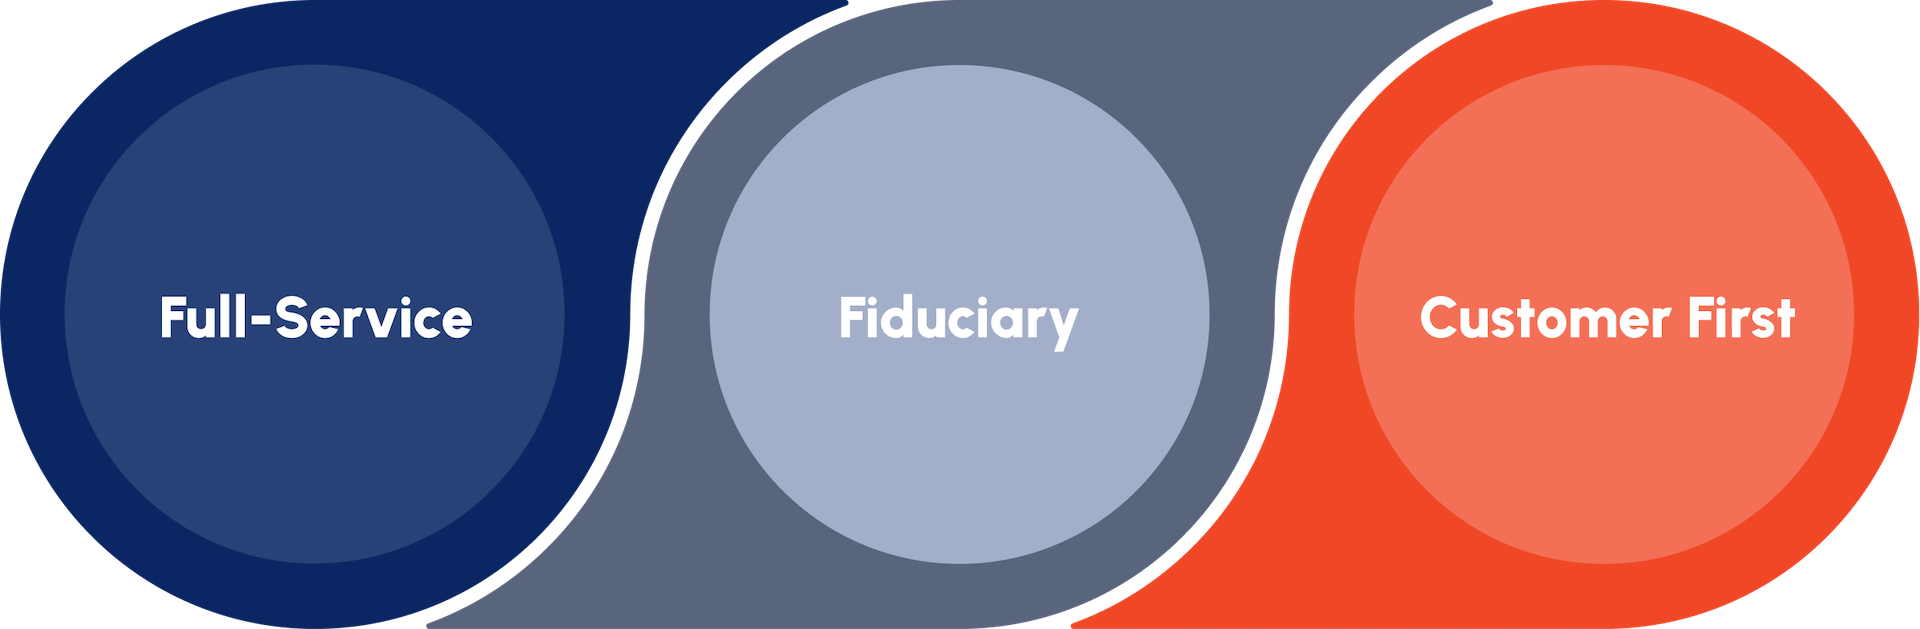 three-bubbles-labelled-full-service-fiduciary-customer-first